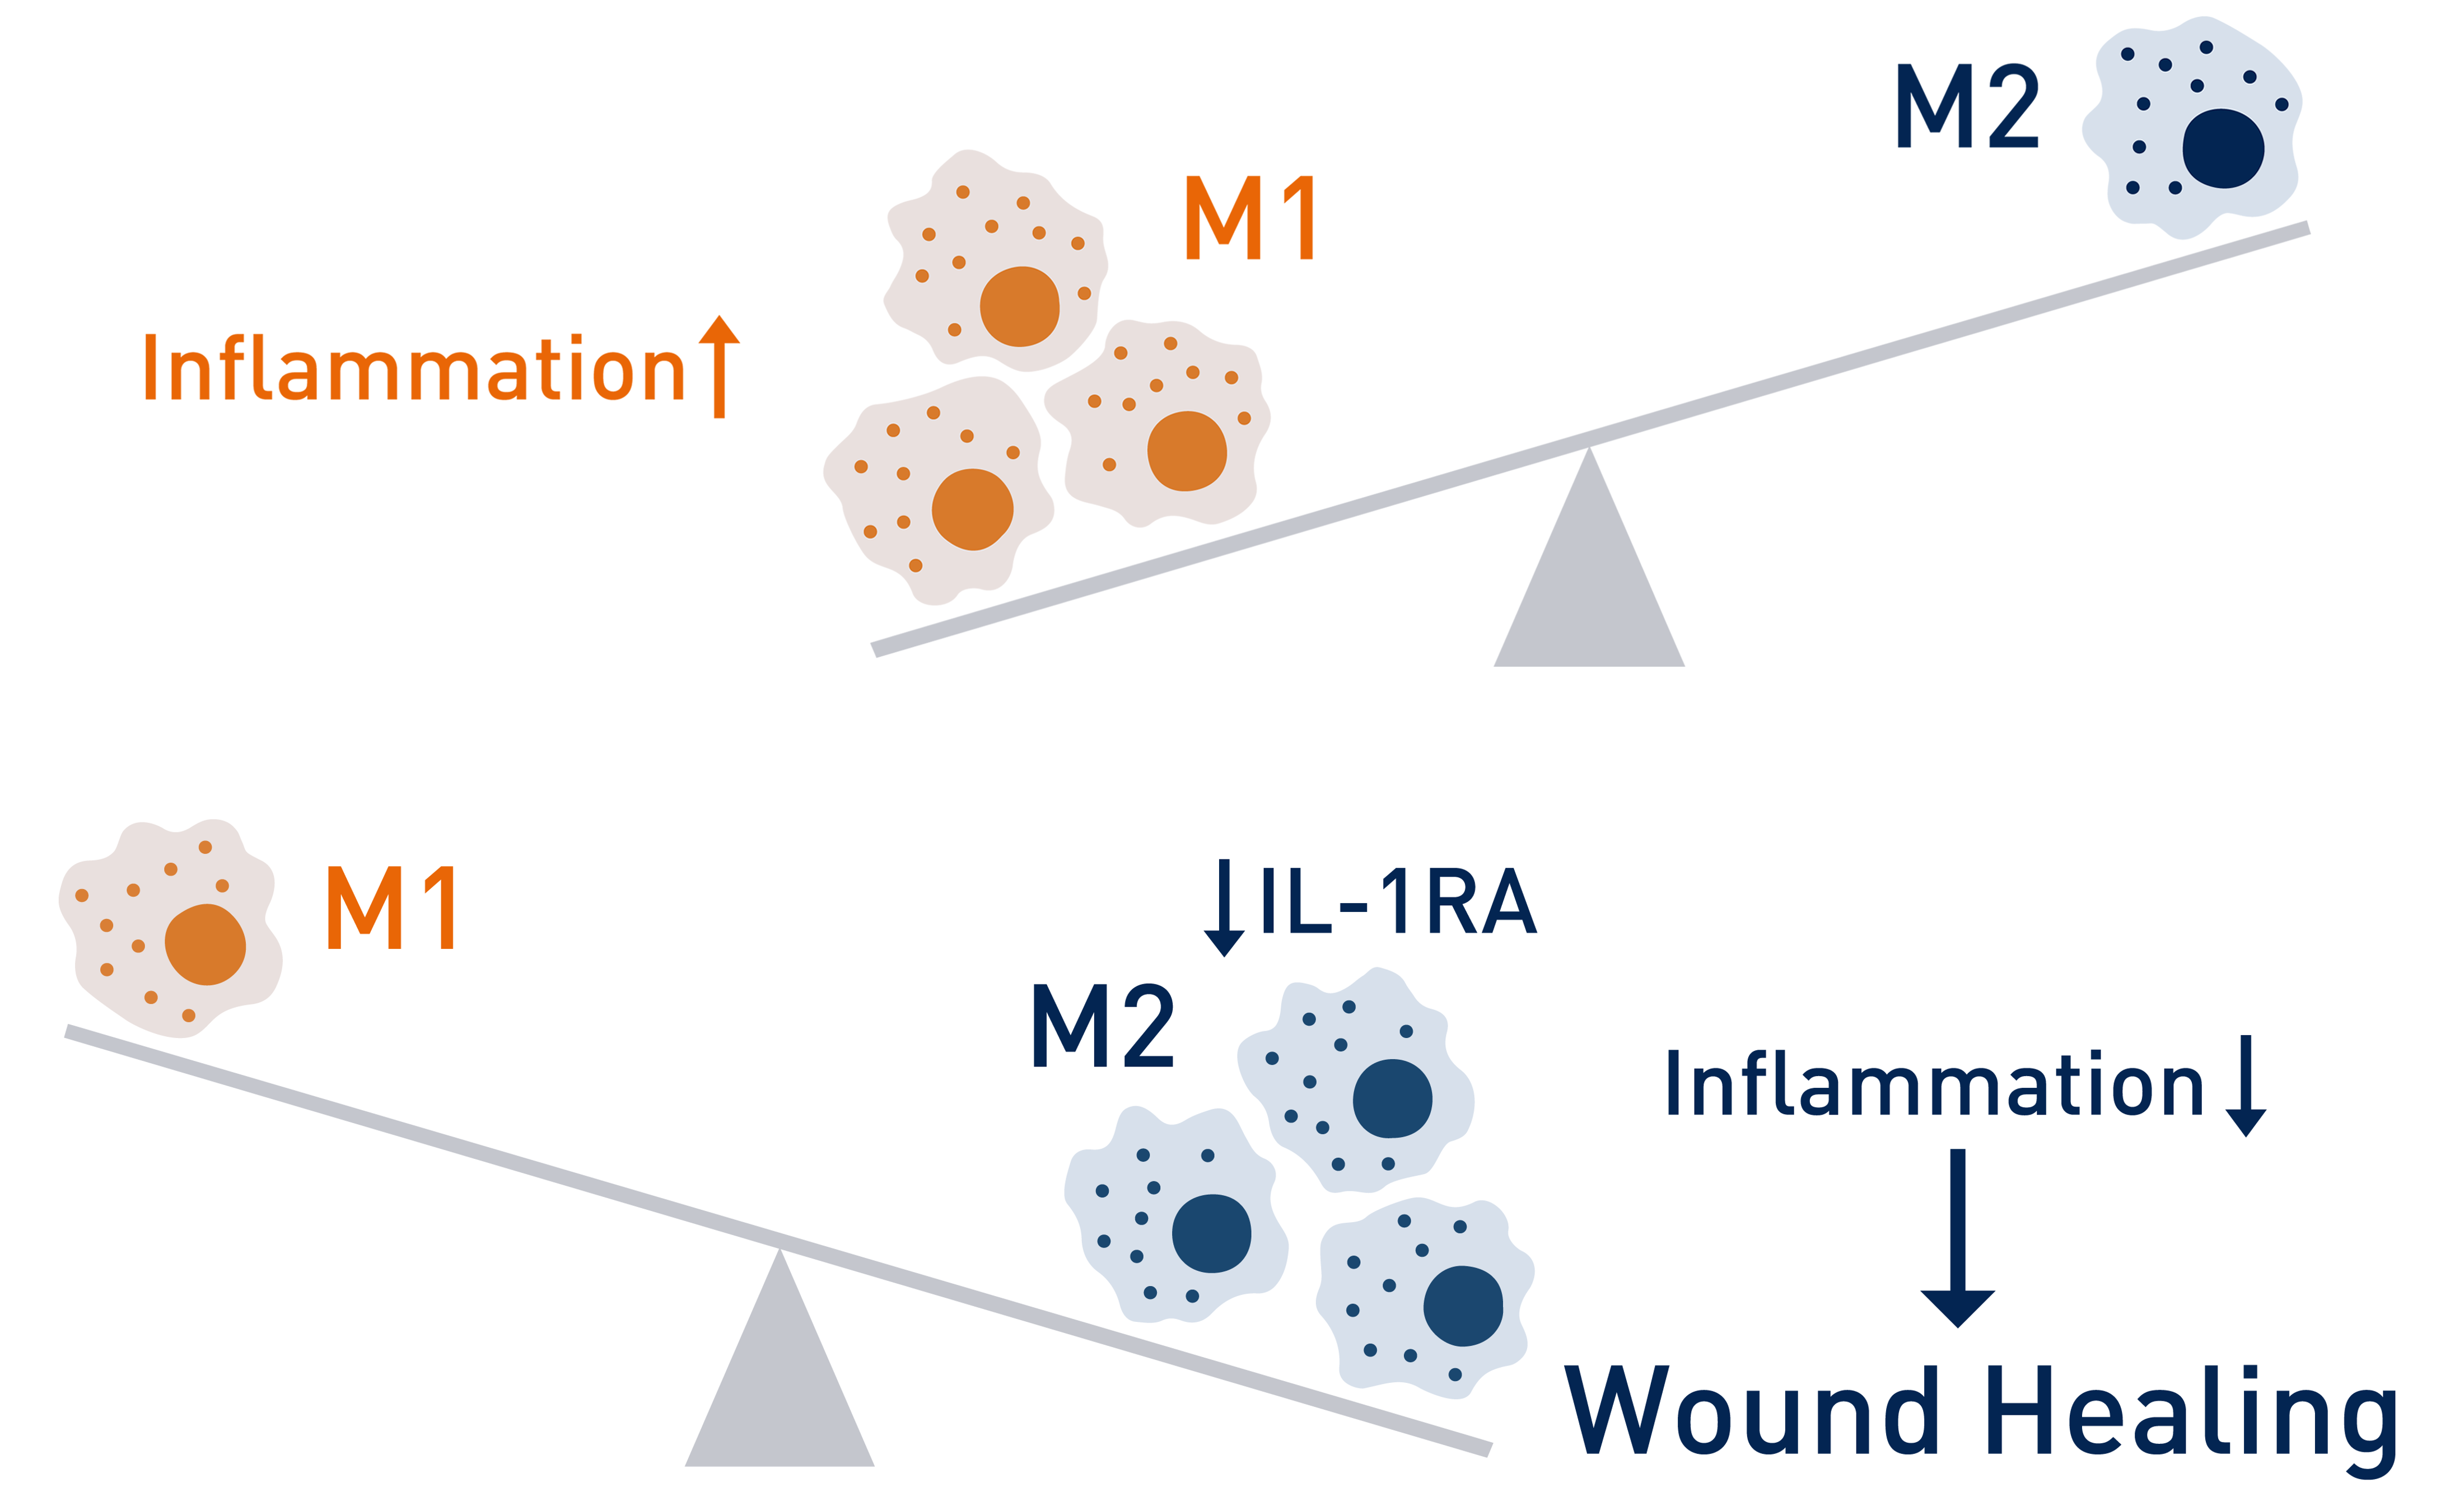 Drawing of the ratio of M1 and M2 macrophages with the help of a scale. In the stage of inflammation M1 macrophages predominate, in wound healing M2 macrophages.